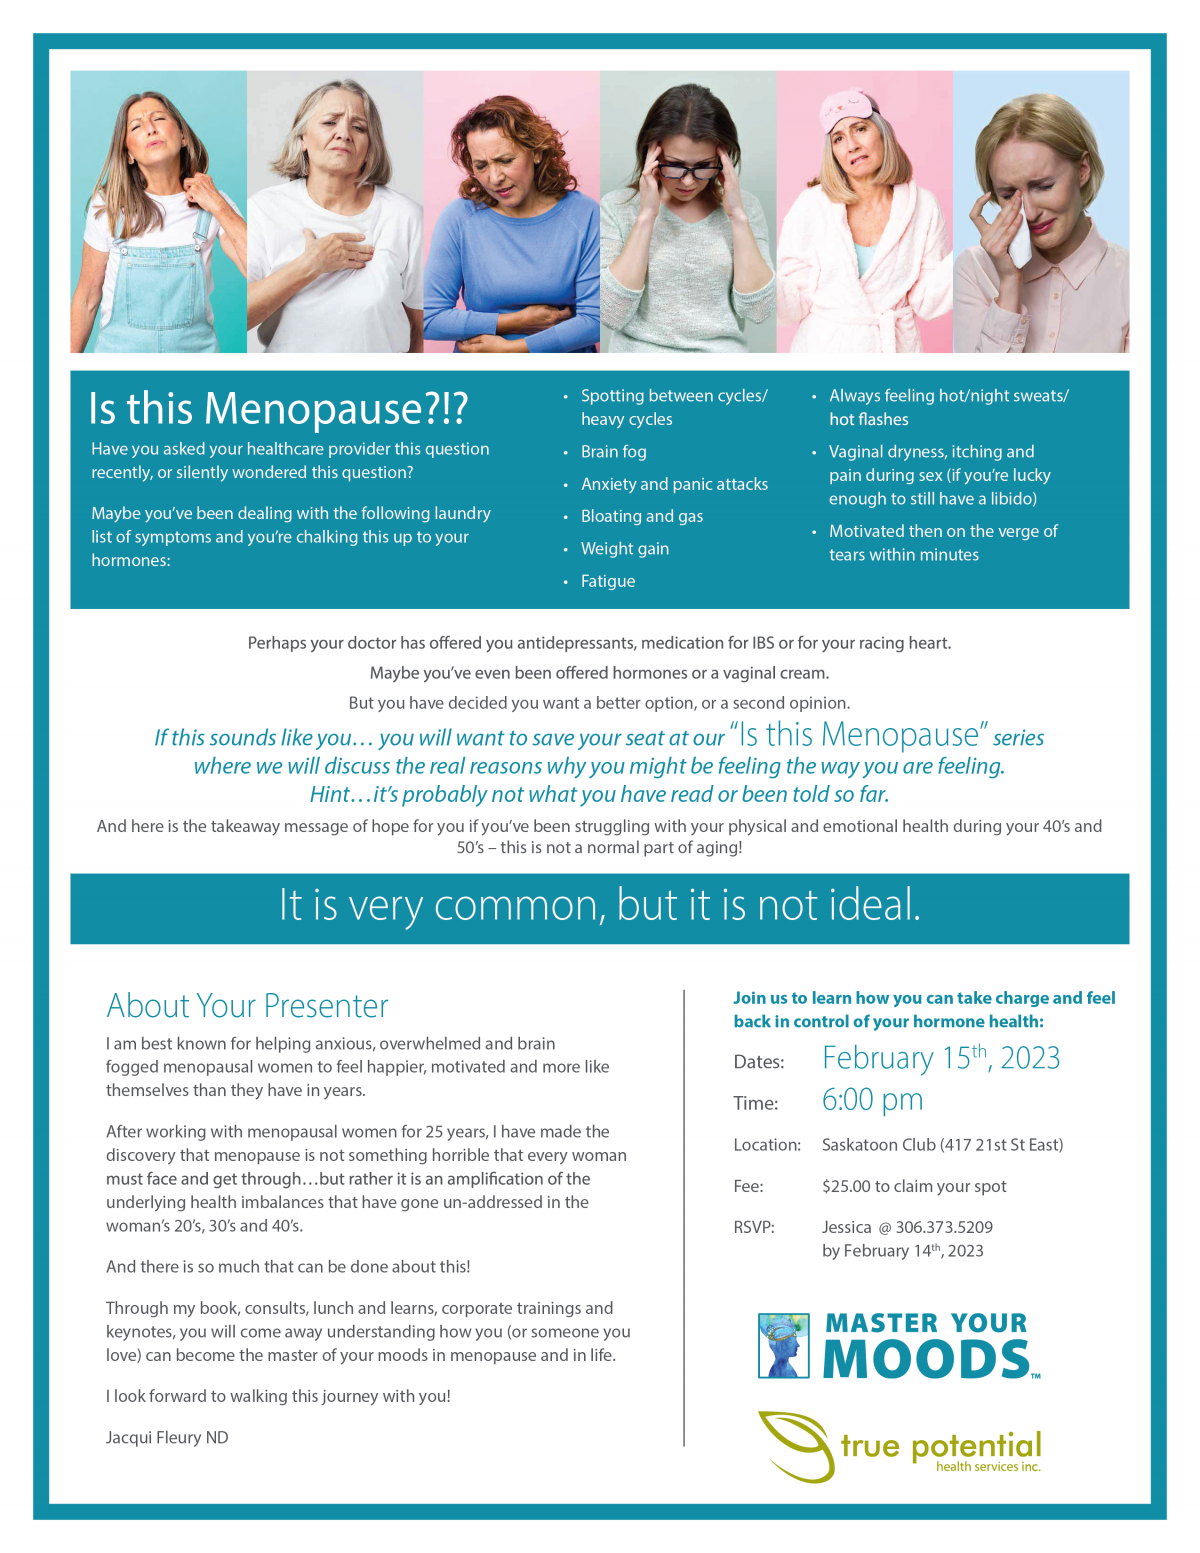 invitation to menopause talk with Dr. Jacqui Fleury